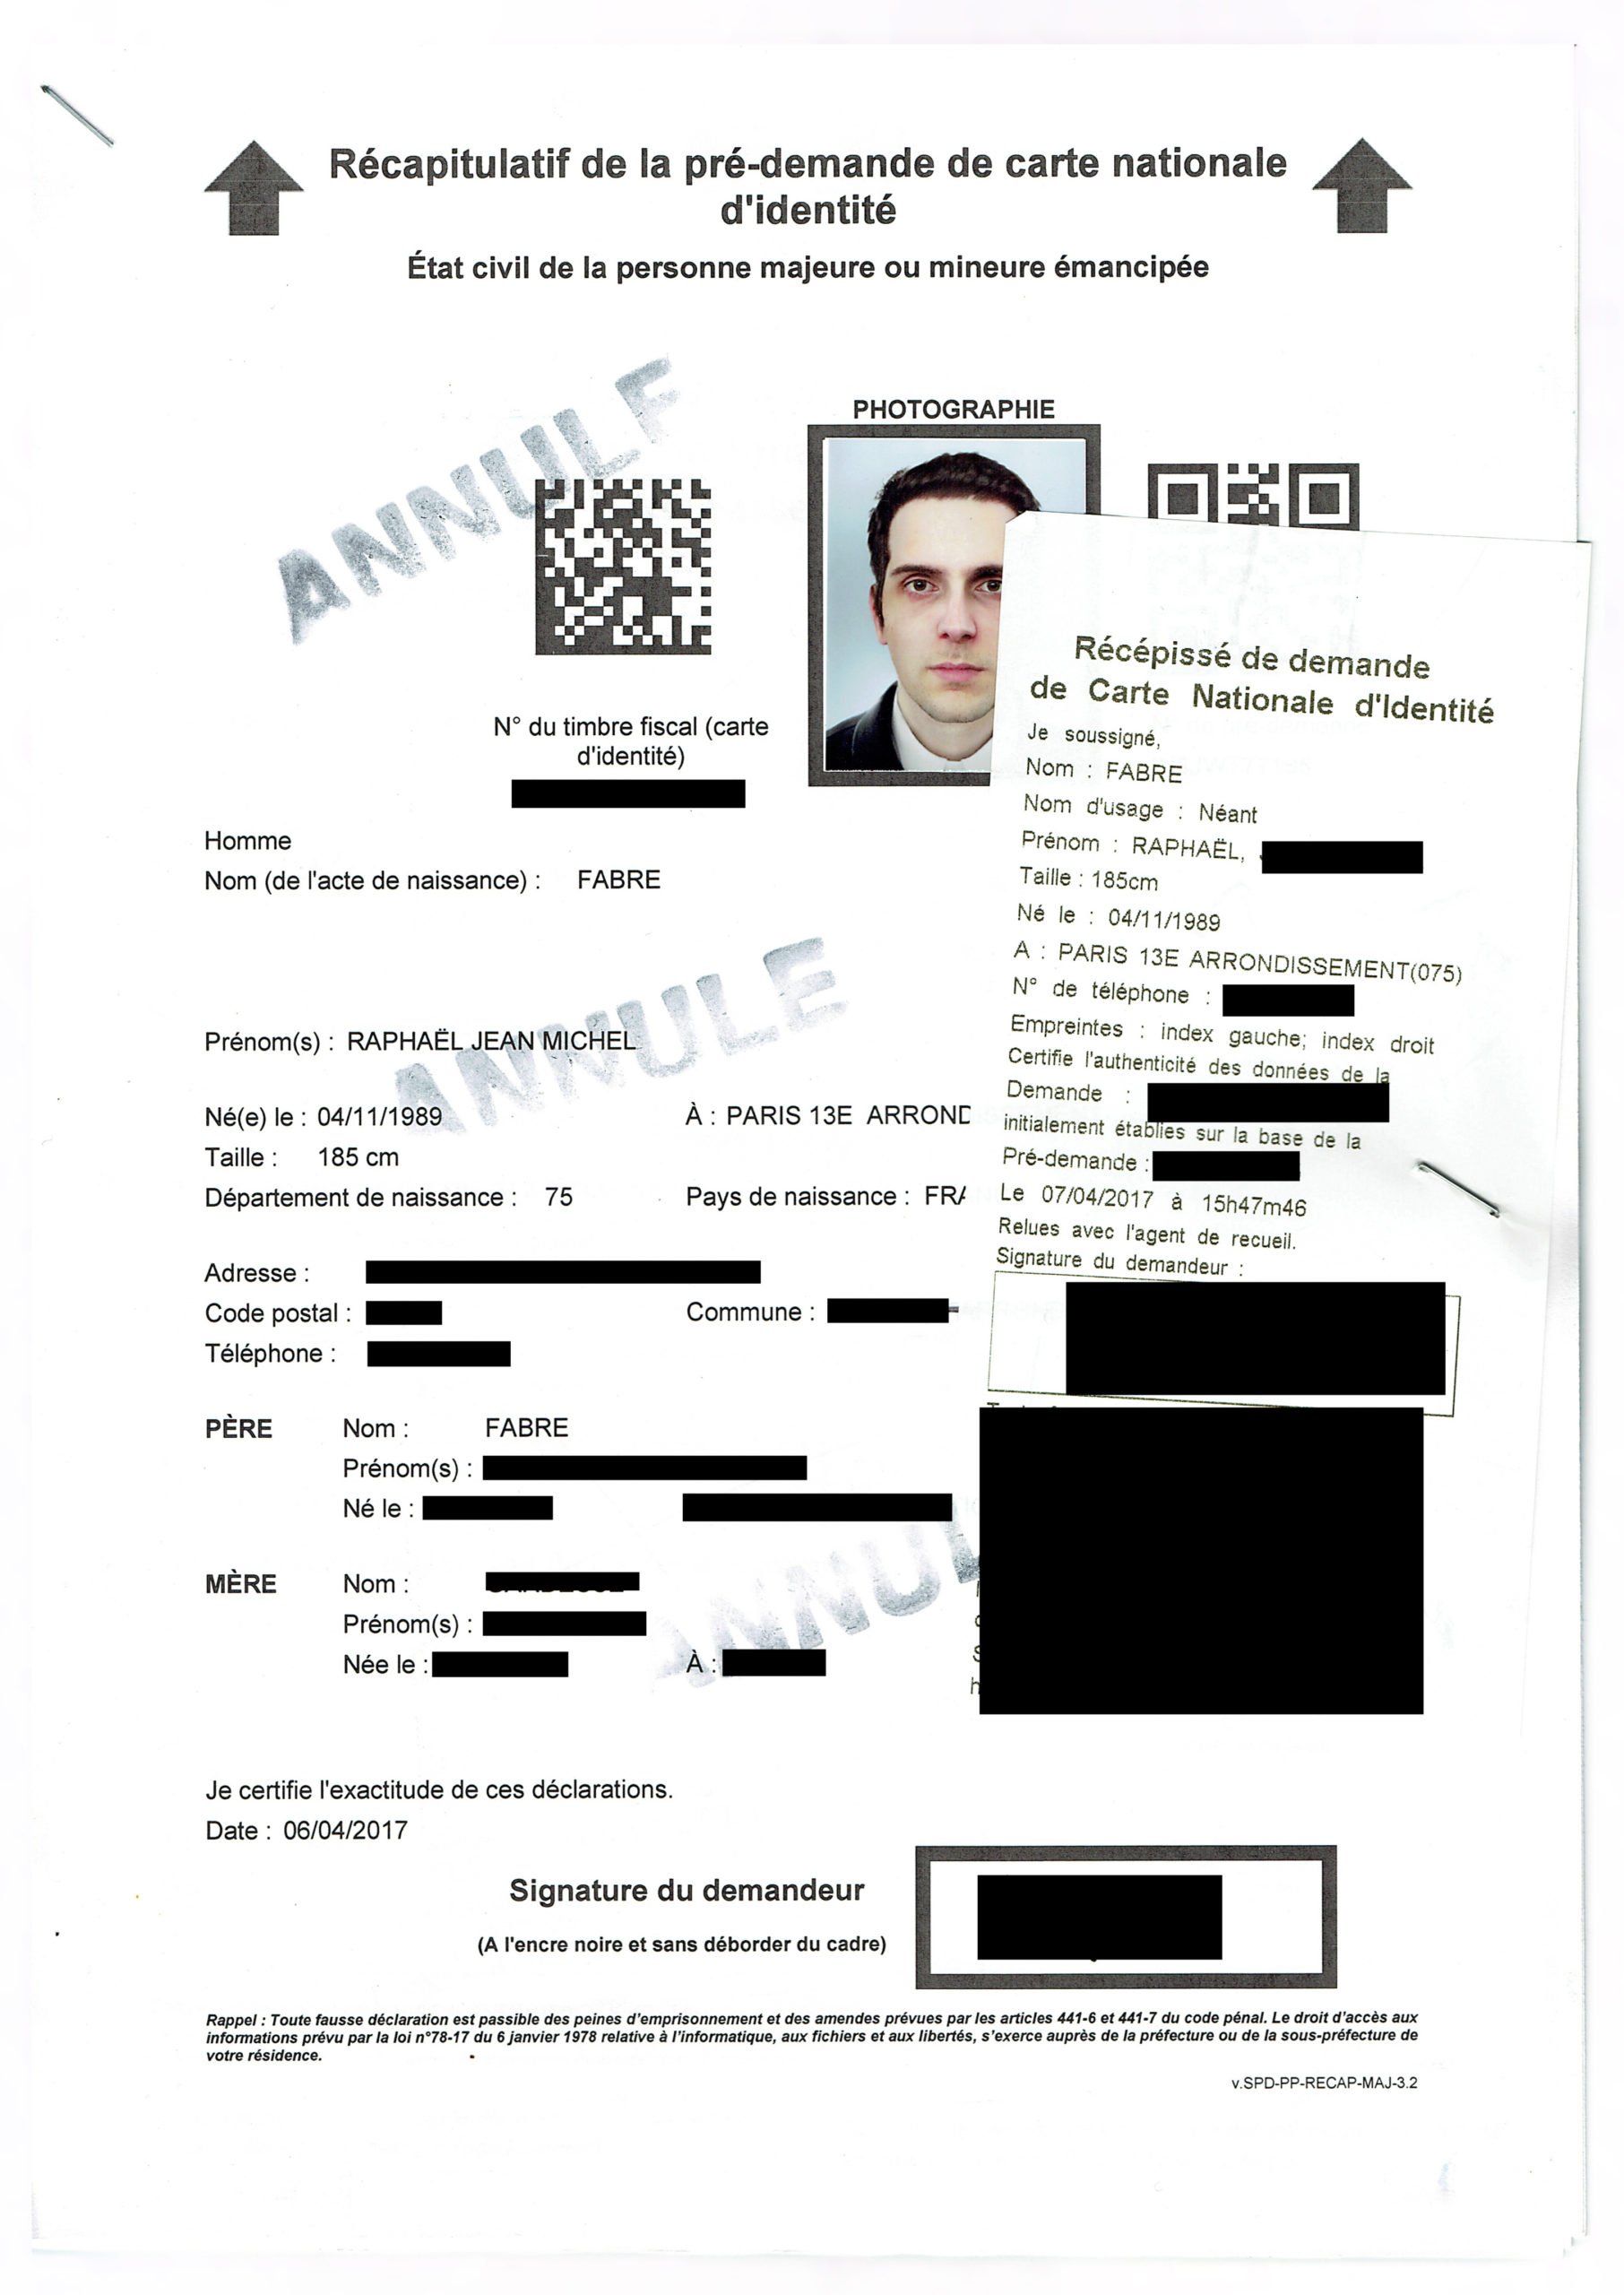 A French Artist Says He Received A National ID Card Using A Computer-Generated Headshot